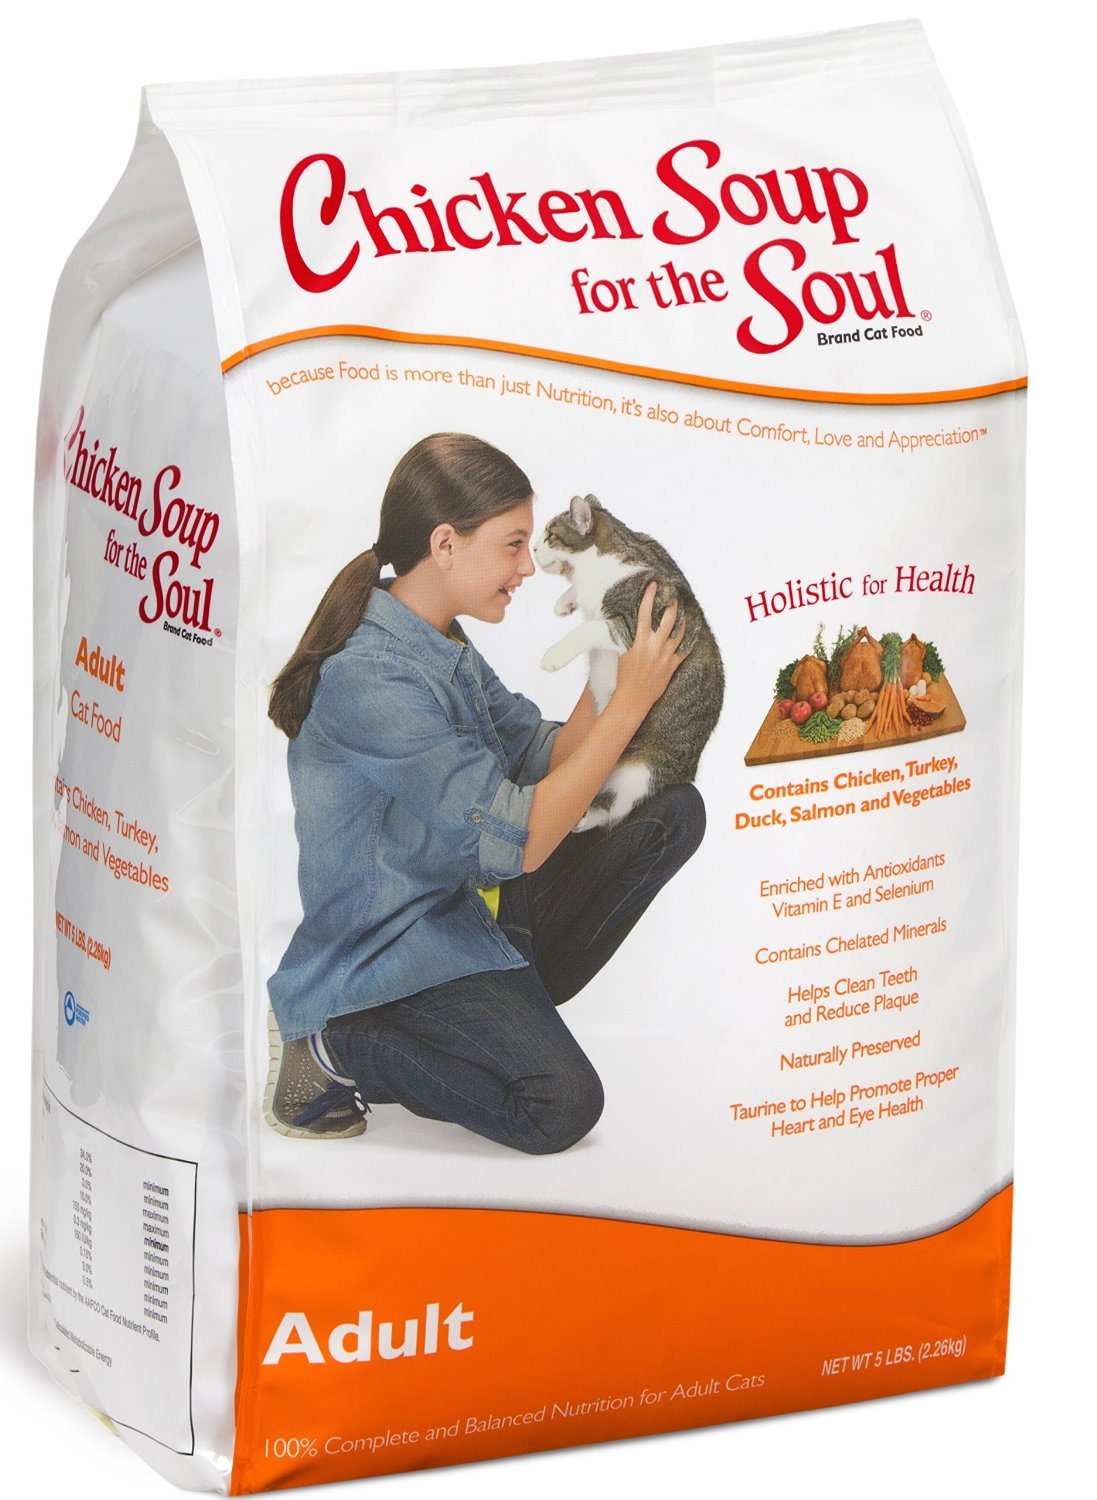 Chicken Soup for The Soul Cat Food Review